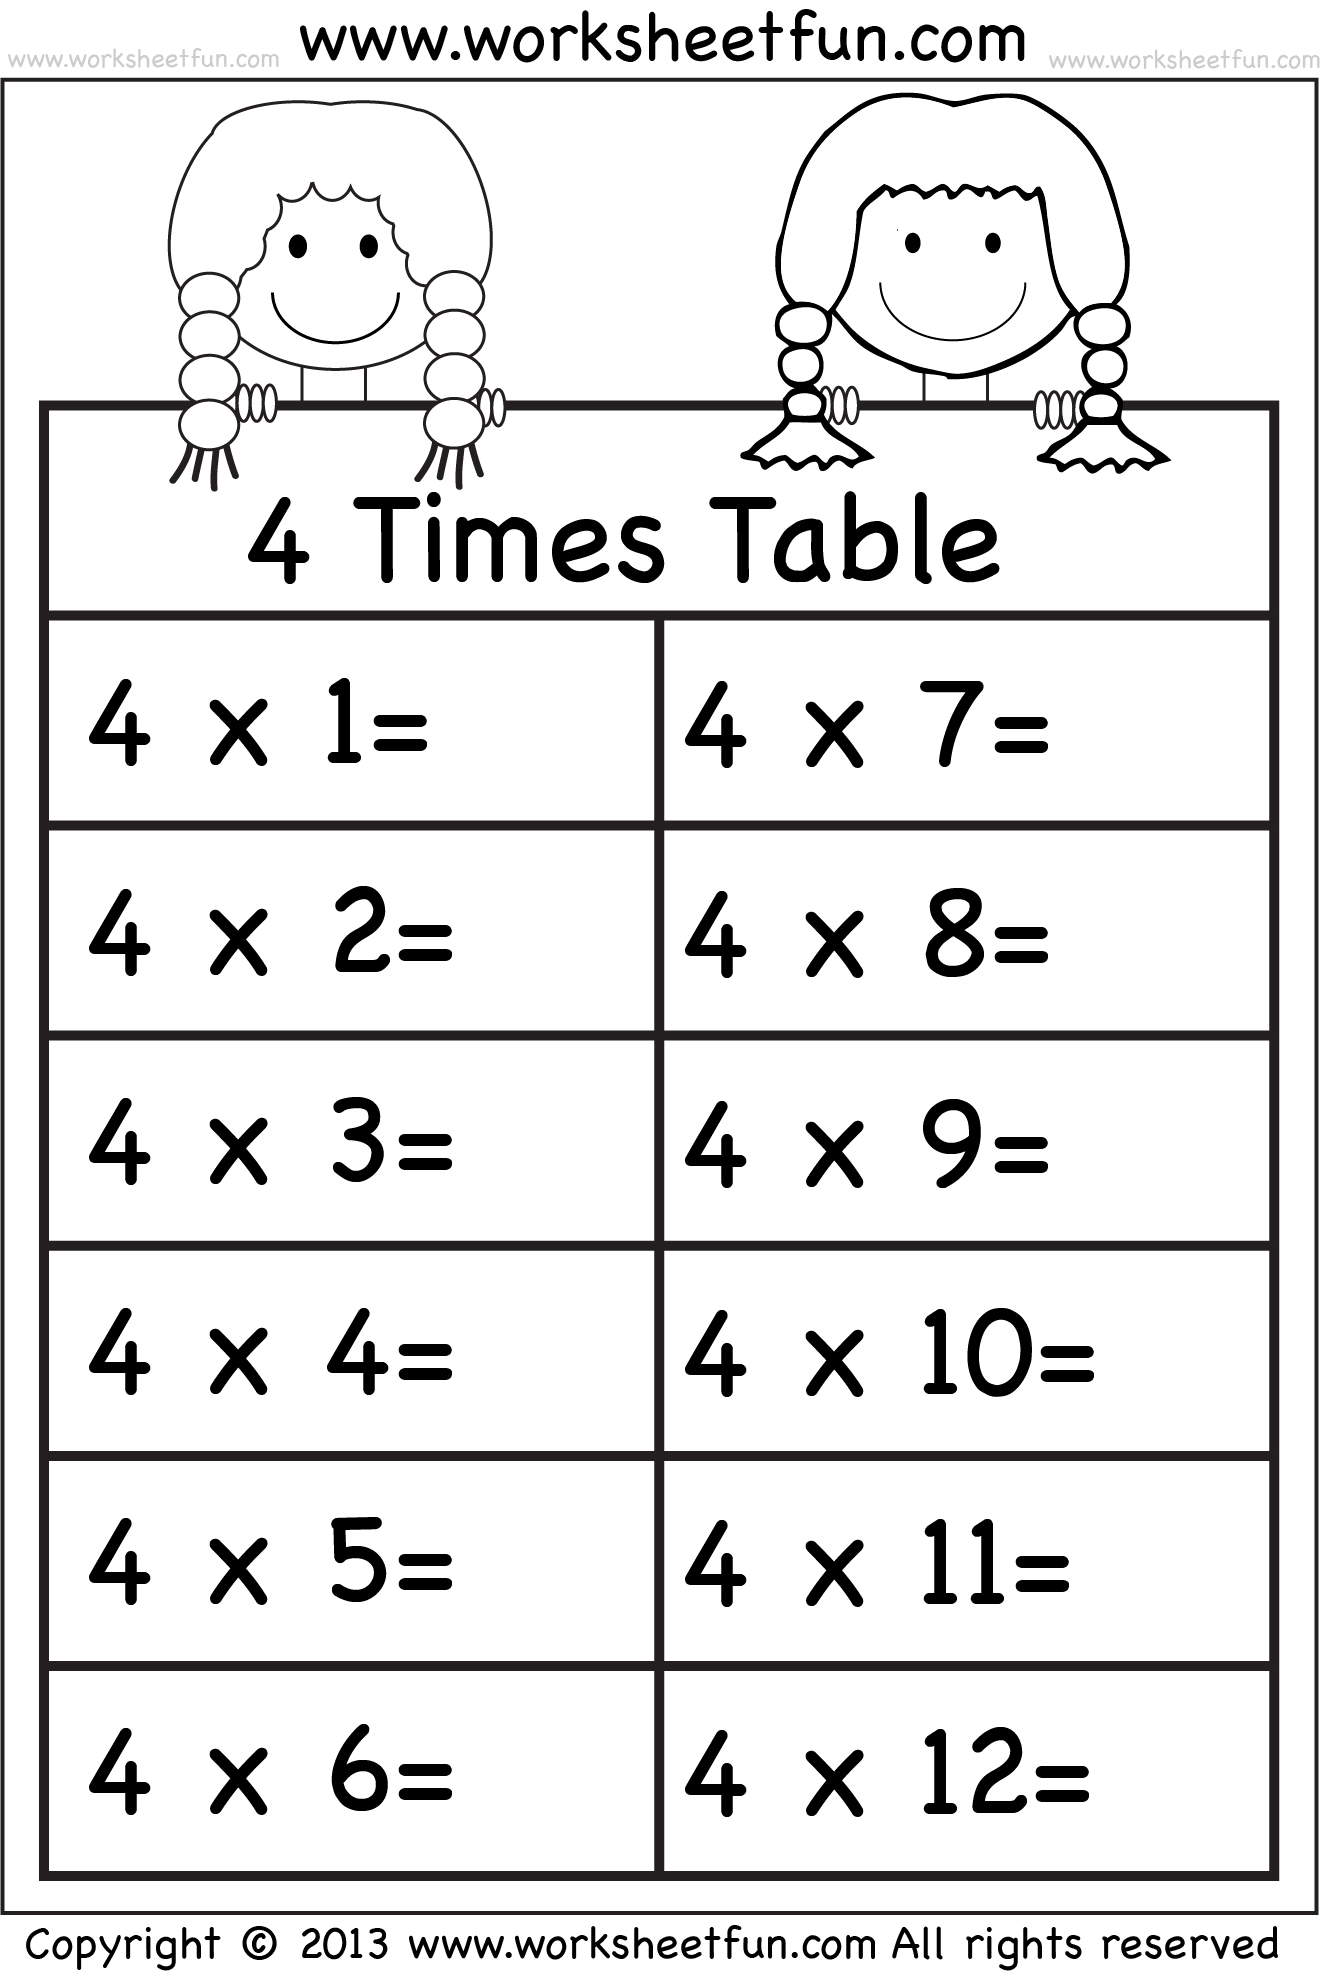 times-tables-worksheets-2-3-4-5-6-7-8-9-10-11-and-12